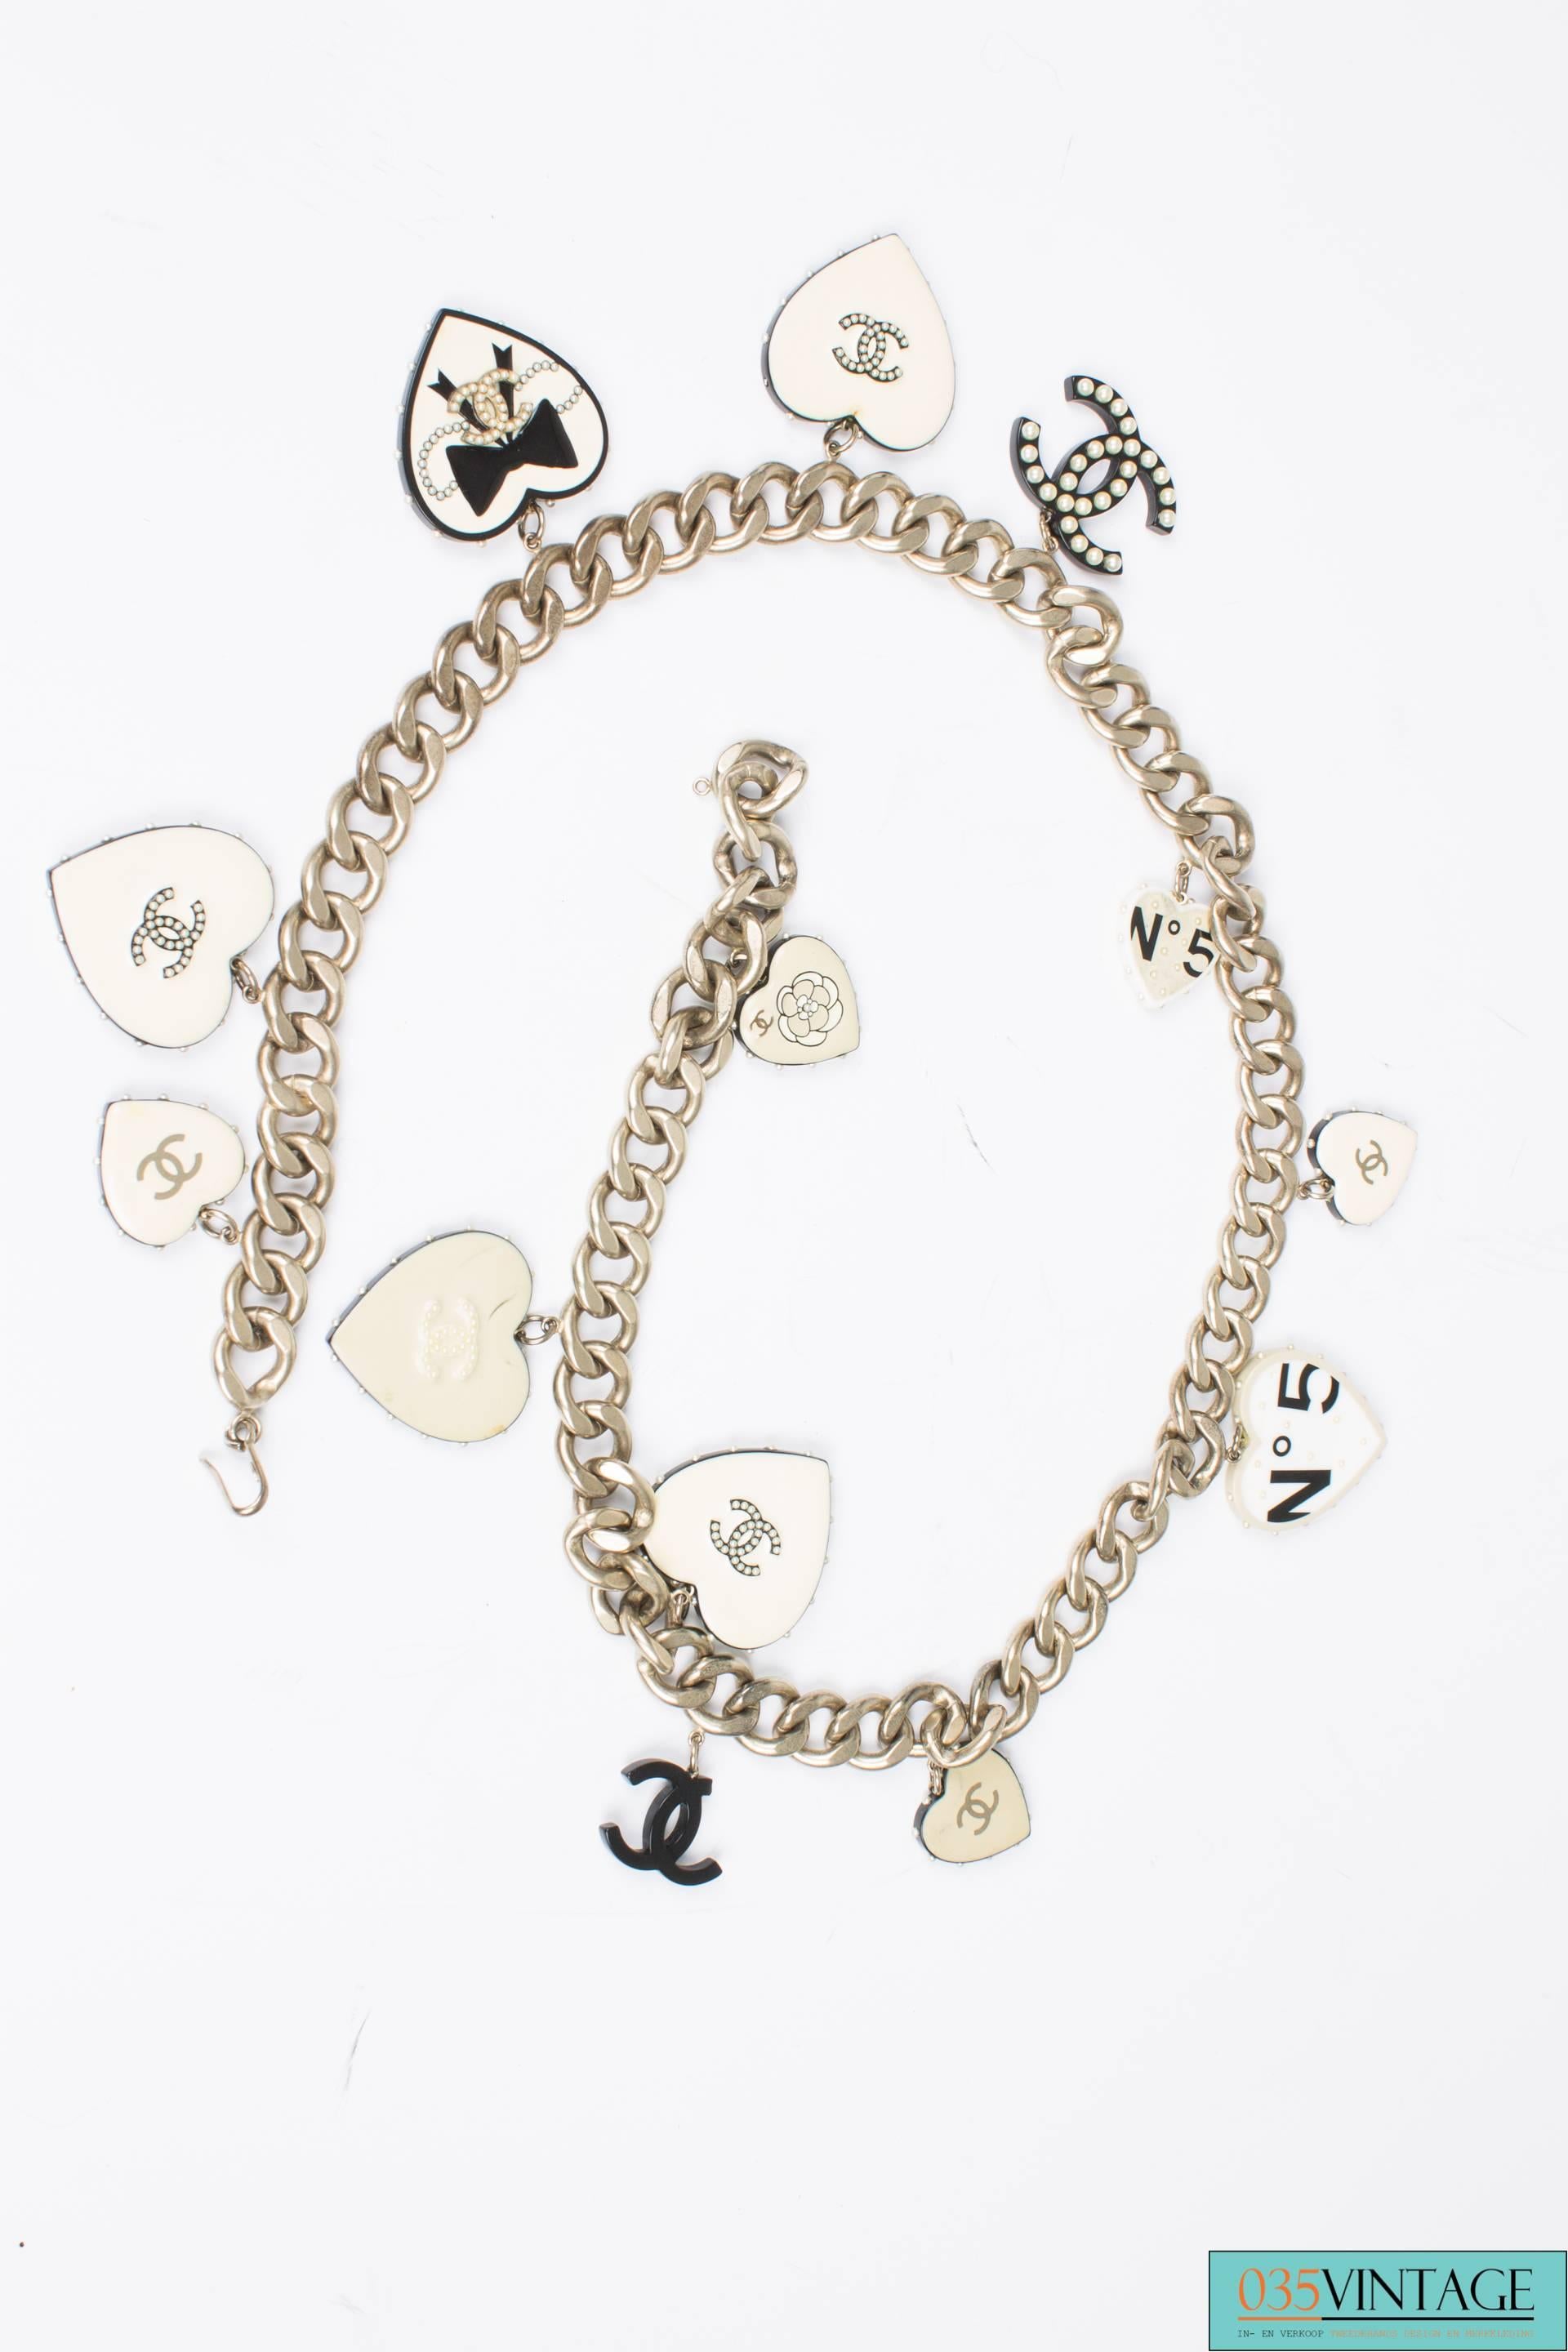 Matte silver Chanel chain waist belt that holds 11 black & white hearts in different sizes.

The chain measures 90 centimeters and closes with a little hook. The hearts all have different images and covered with little pearls. Two CC shaped